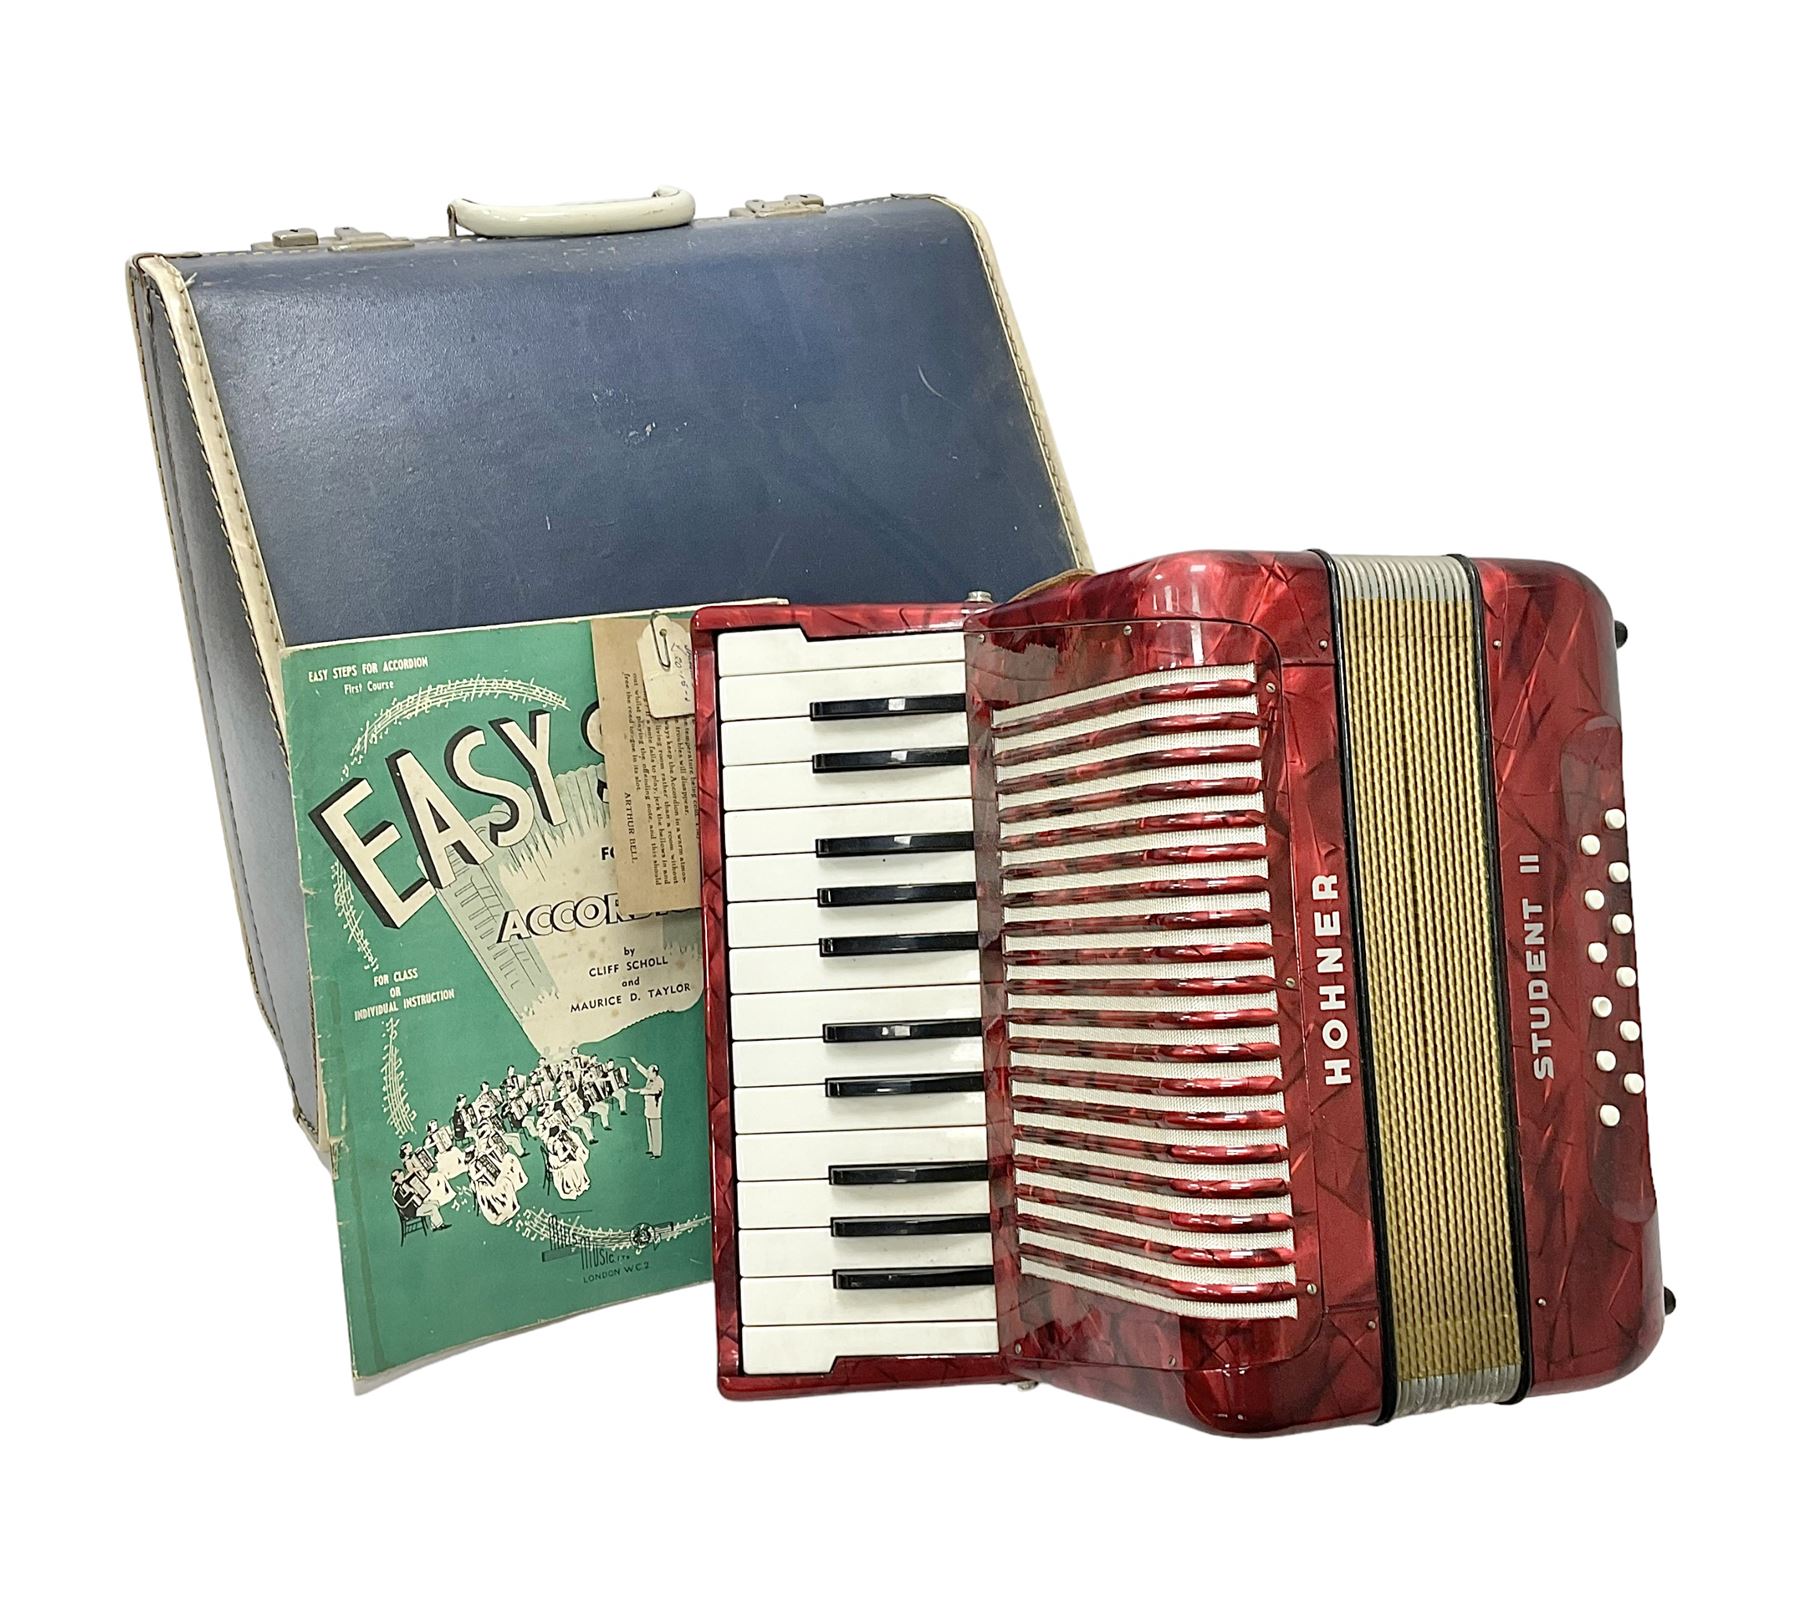 German Hohner student II compact accordion with 26 keys and 12 bass registers in a hard case With tu